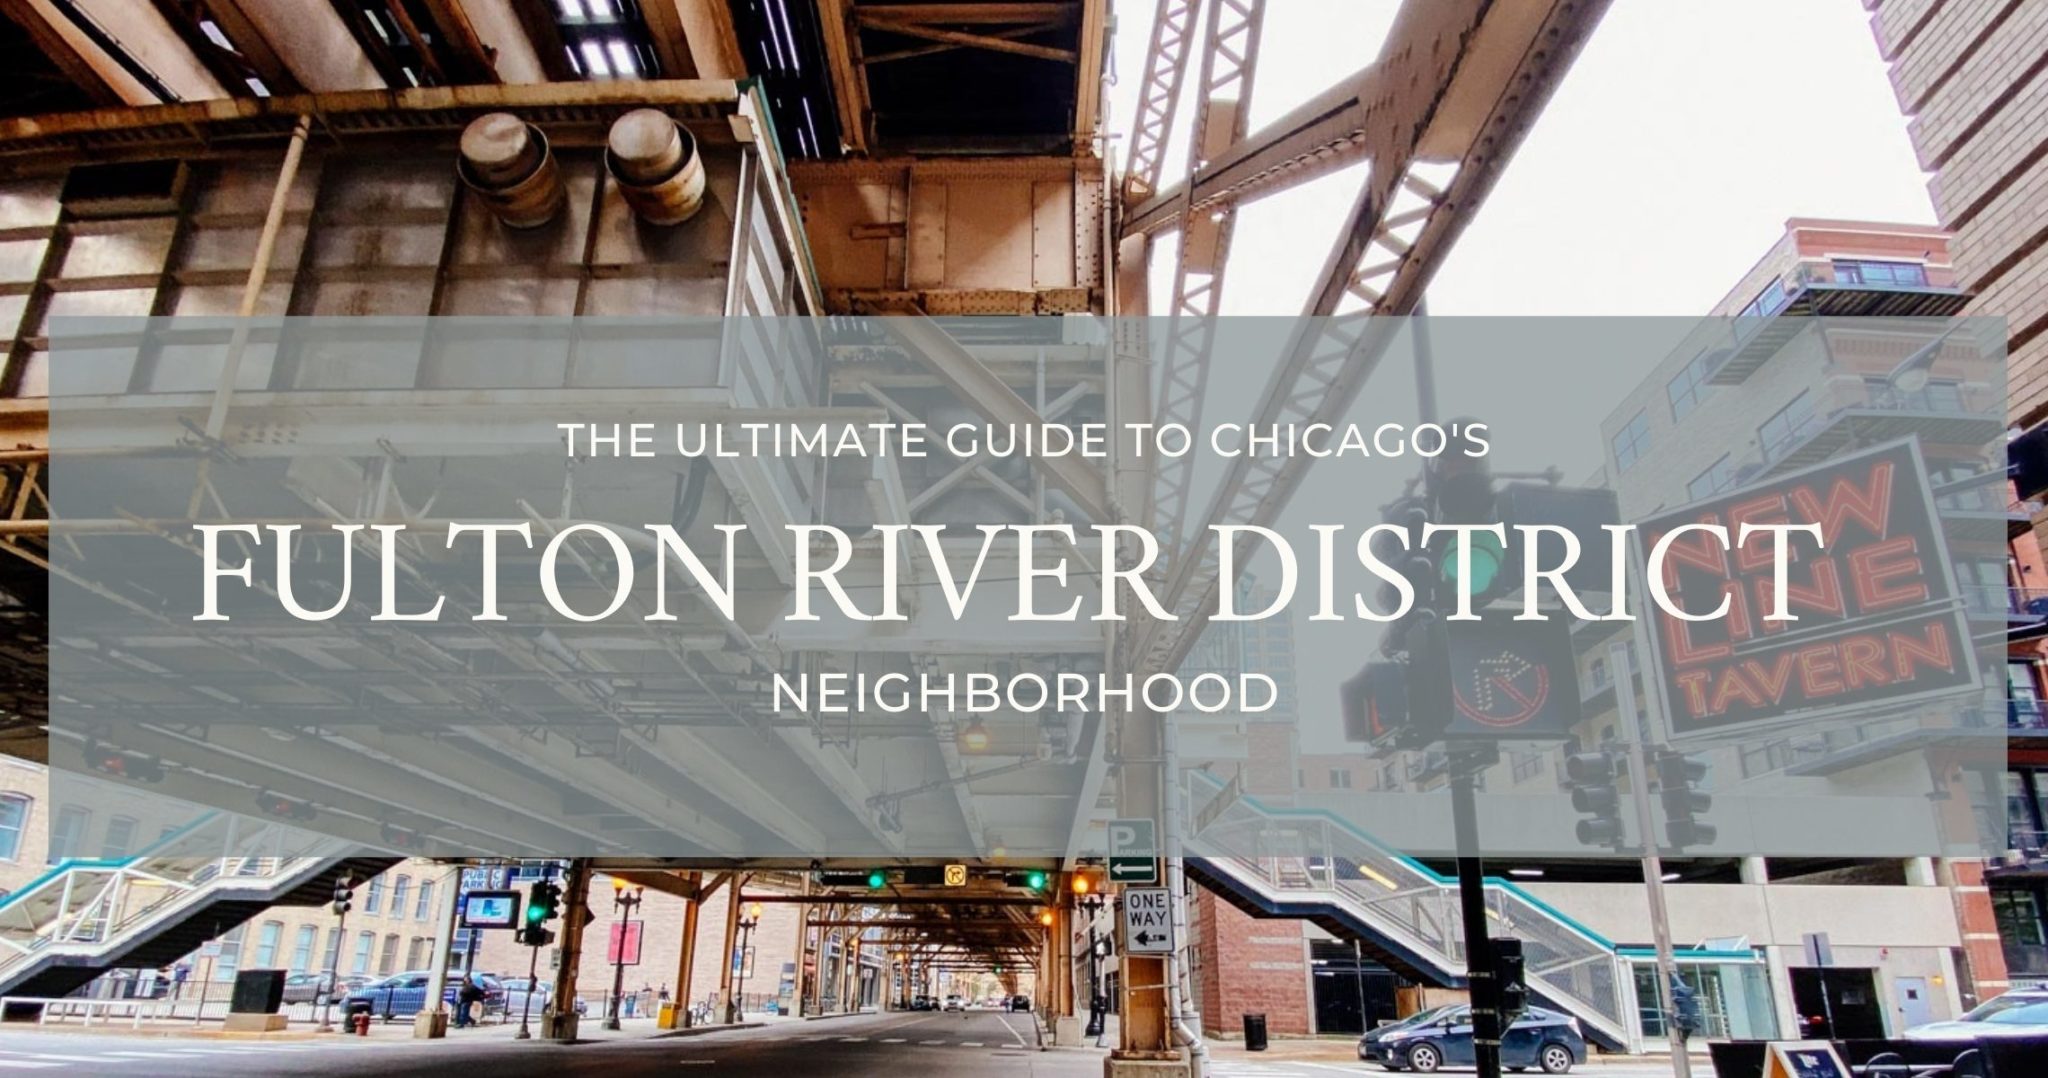 The Ultimate Guide to Chicago's Fulton River District Neighborhood